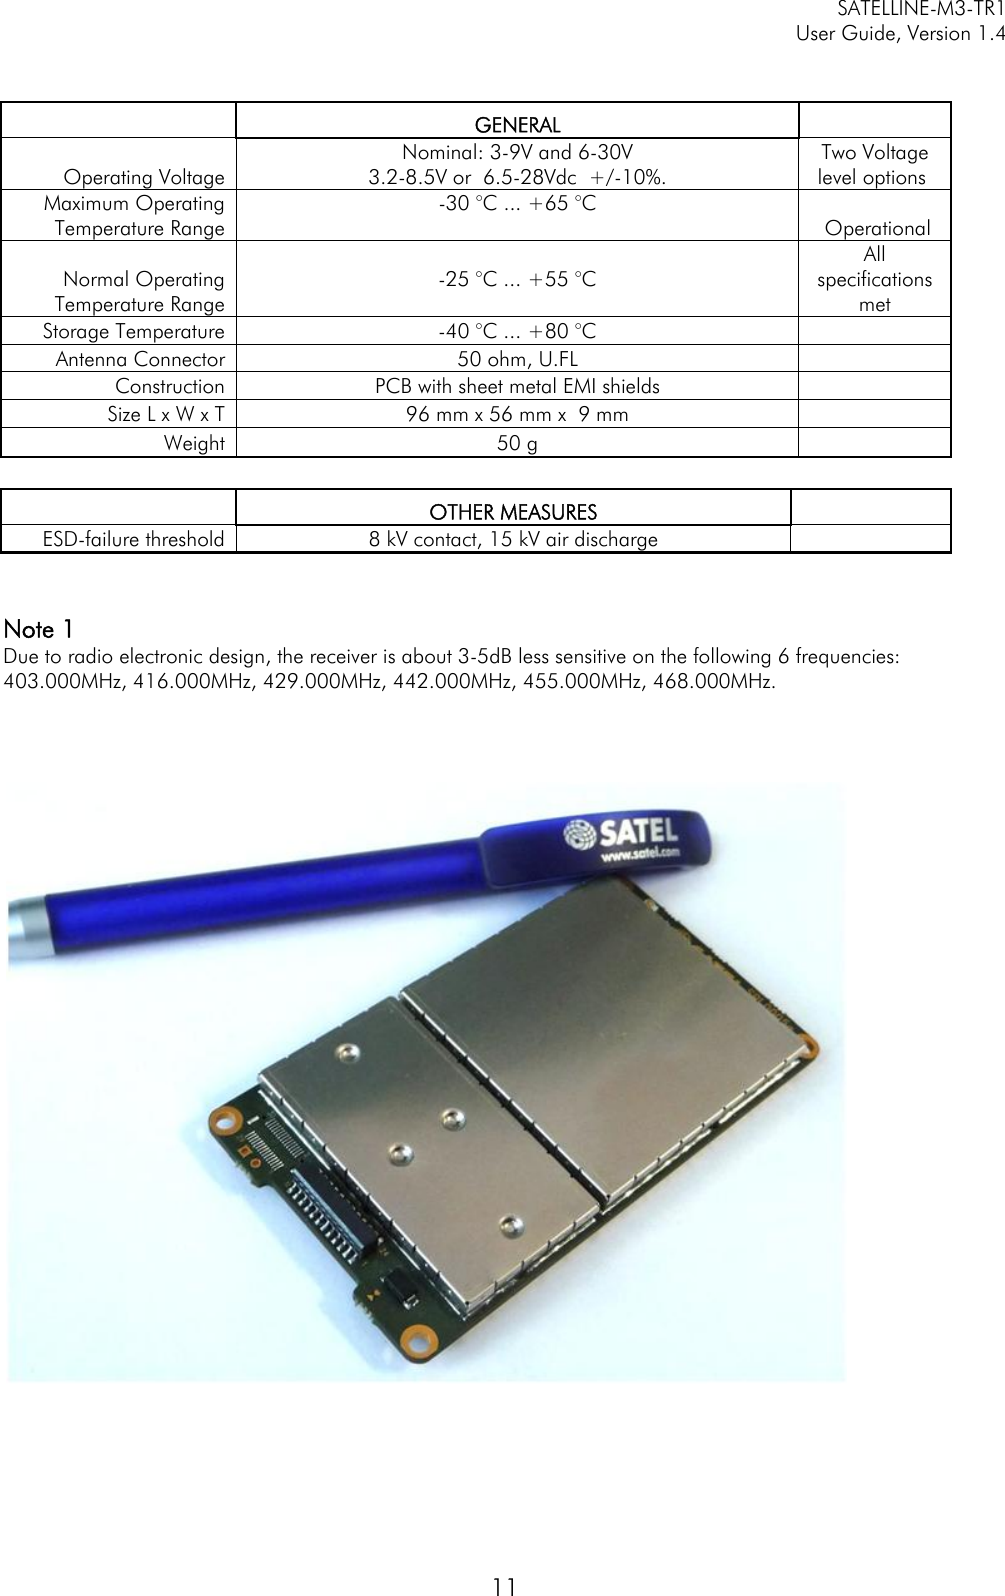   SATELLINE-M3-TR1     User Guide, Version 1.4   11     GENERAL    Operating Voltage  Nominal: 3-9V and 6-30V 3.2-8.5V or  6.5-28Vdc  +/-10%. Two Voltage level options  Maximum Operating Temperature Range -30 °C ... +65 °C    Operational Normal Operating Temperature Range  -25 °C ... +55 °C   All specifications met Storage Temperature  -40 °C ... +80 °C    Antenna Connector  50 ohm, U.FL     Construction  PCB with sheet metal EMI shields     Size L x W x T  96 mm x 56 mm x  9 mm    Weight  50 g         OTHER MEASURES    ESD-failure threshold  8 kV contact, 15 kV air discharge     Note 1 Due to radio electronic design, the receiver is about 3-5dB less sensitive on the following 6 frequencies:  403.000MHz, 416.000MHz, 429.000MHz, 442.000MHz, 455.000MHz, 468.000MHz.      